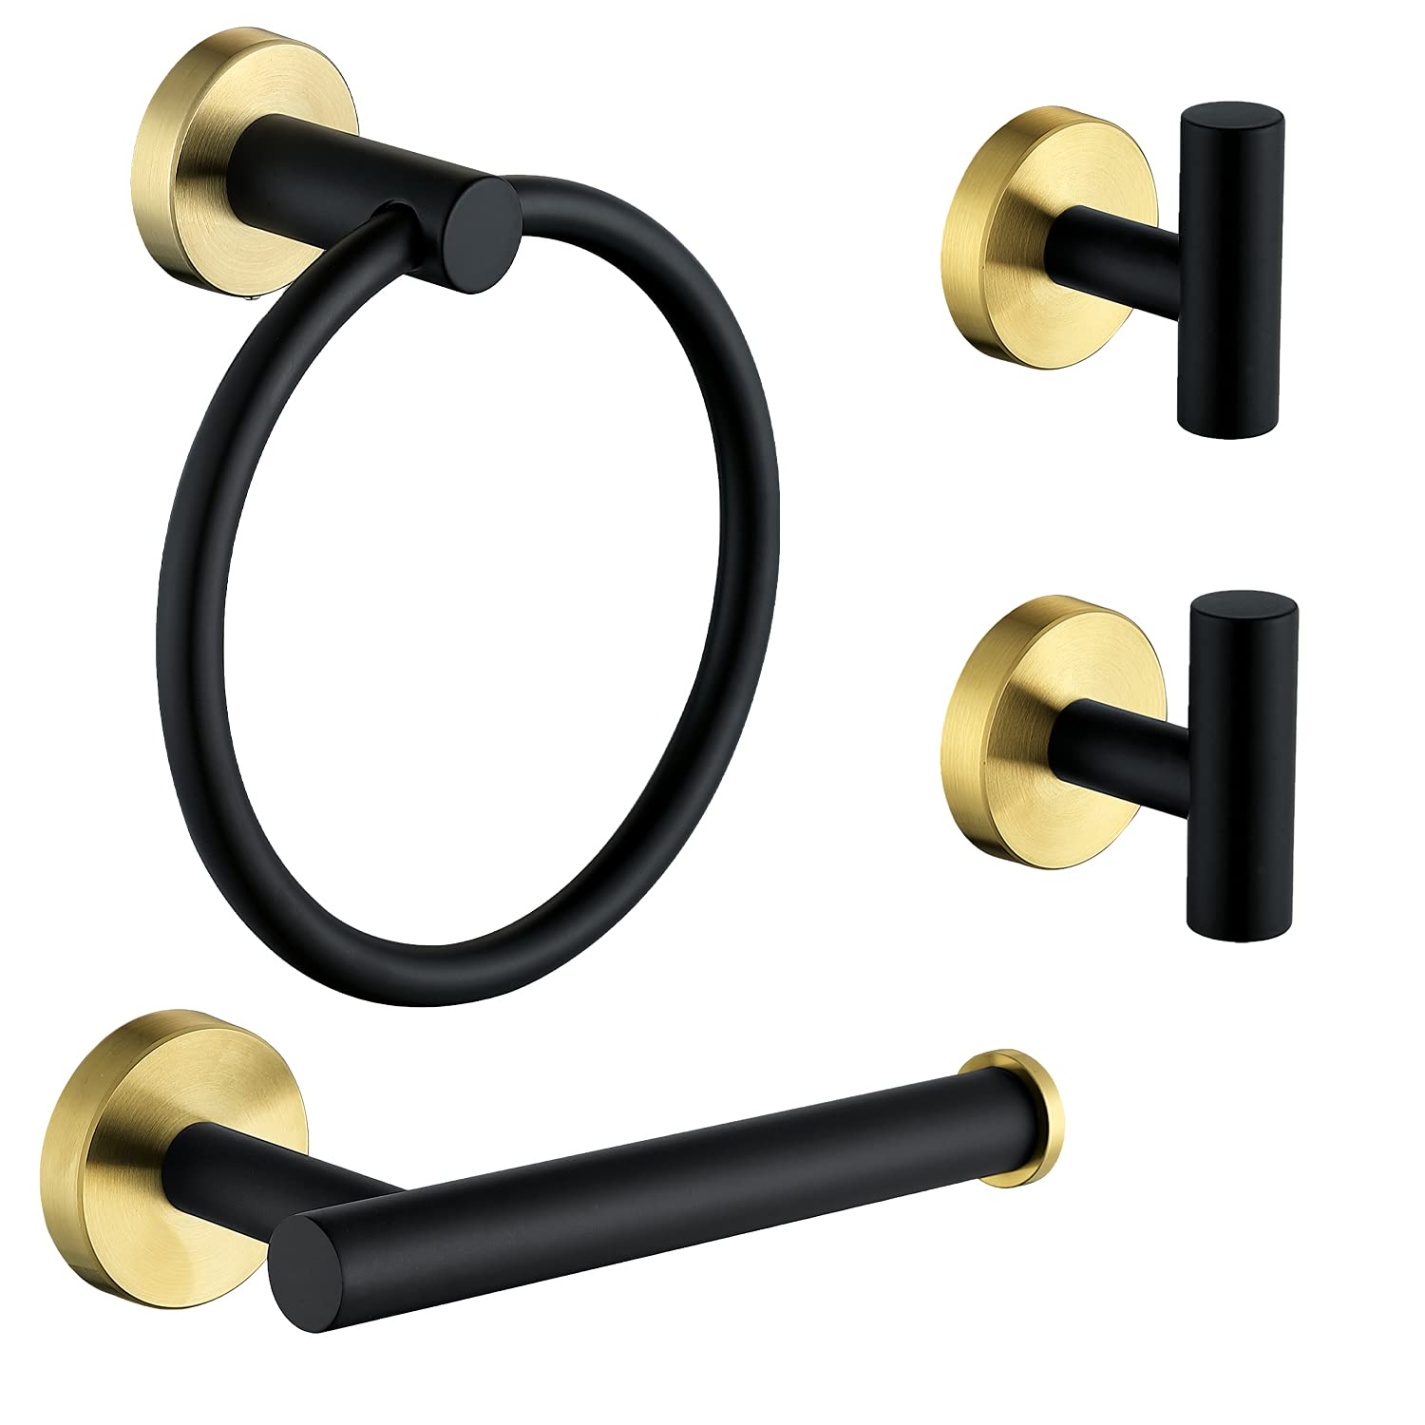 black and gold bathroom accessories Niche Utama Home  Piece Stainless Steel Matte Black and Brushed Gold Bathroom Hardware Set  Include Hand Towel Ring Holder, Toilet Paper Holder,and  Robe Towel